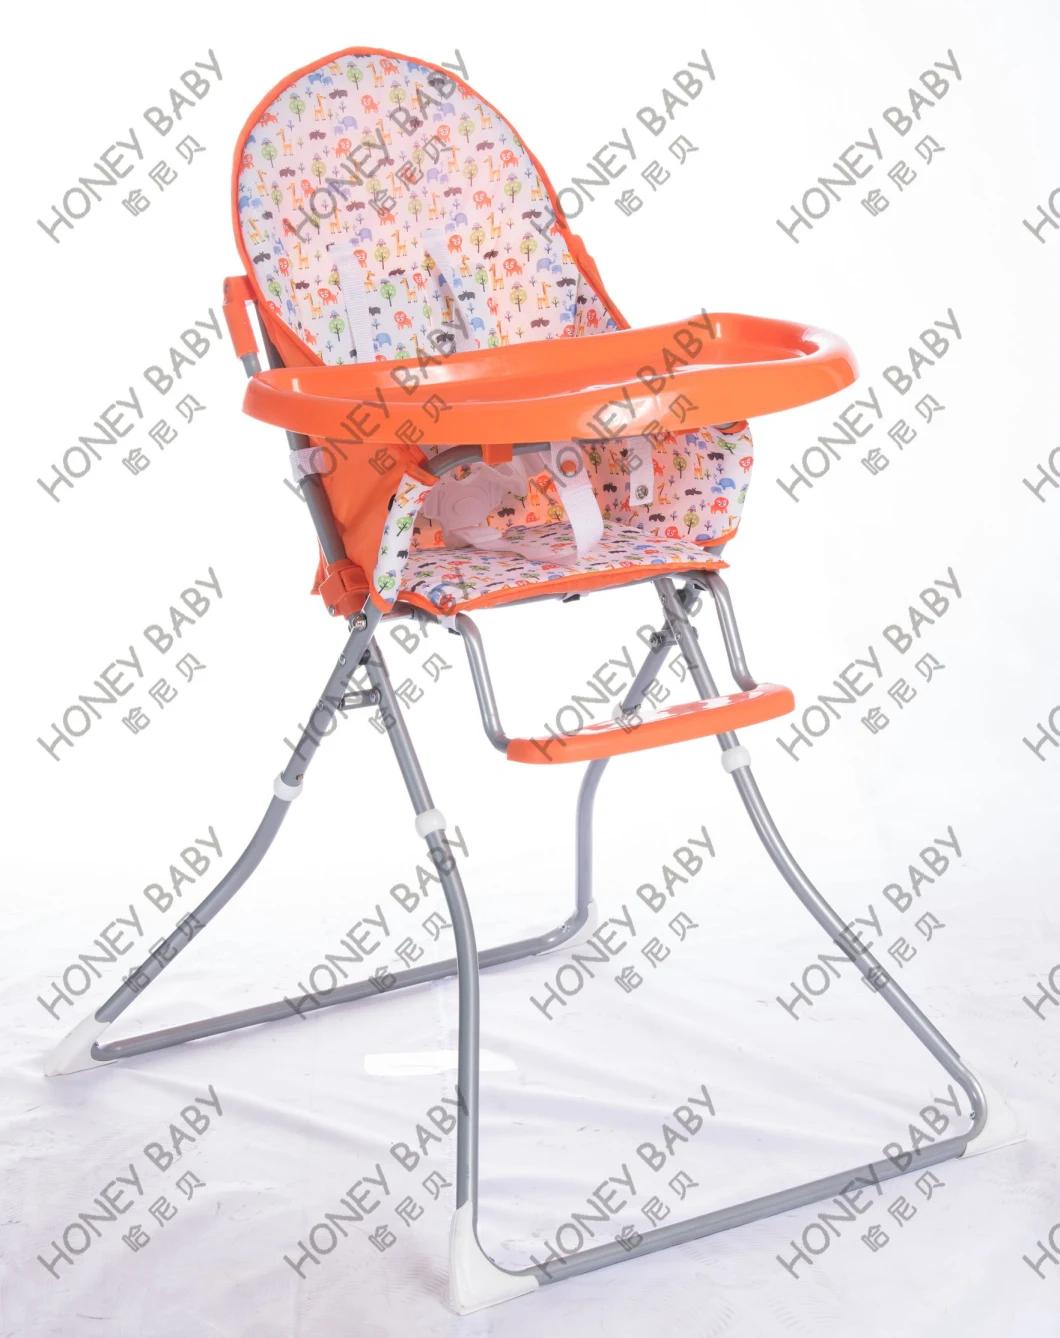 Factory Big Tray High Chair /Baby High Chair Easy to Folding and Storage